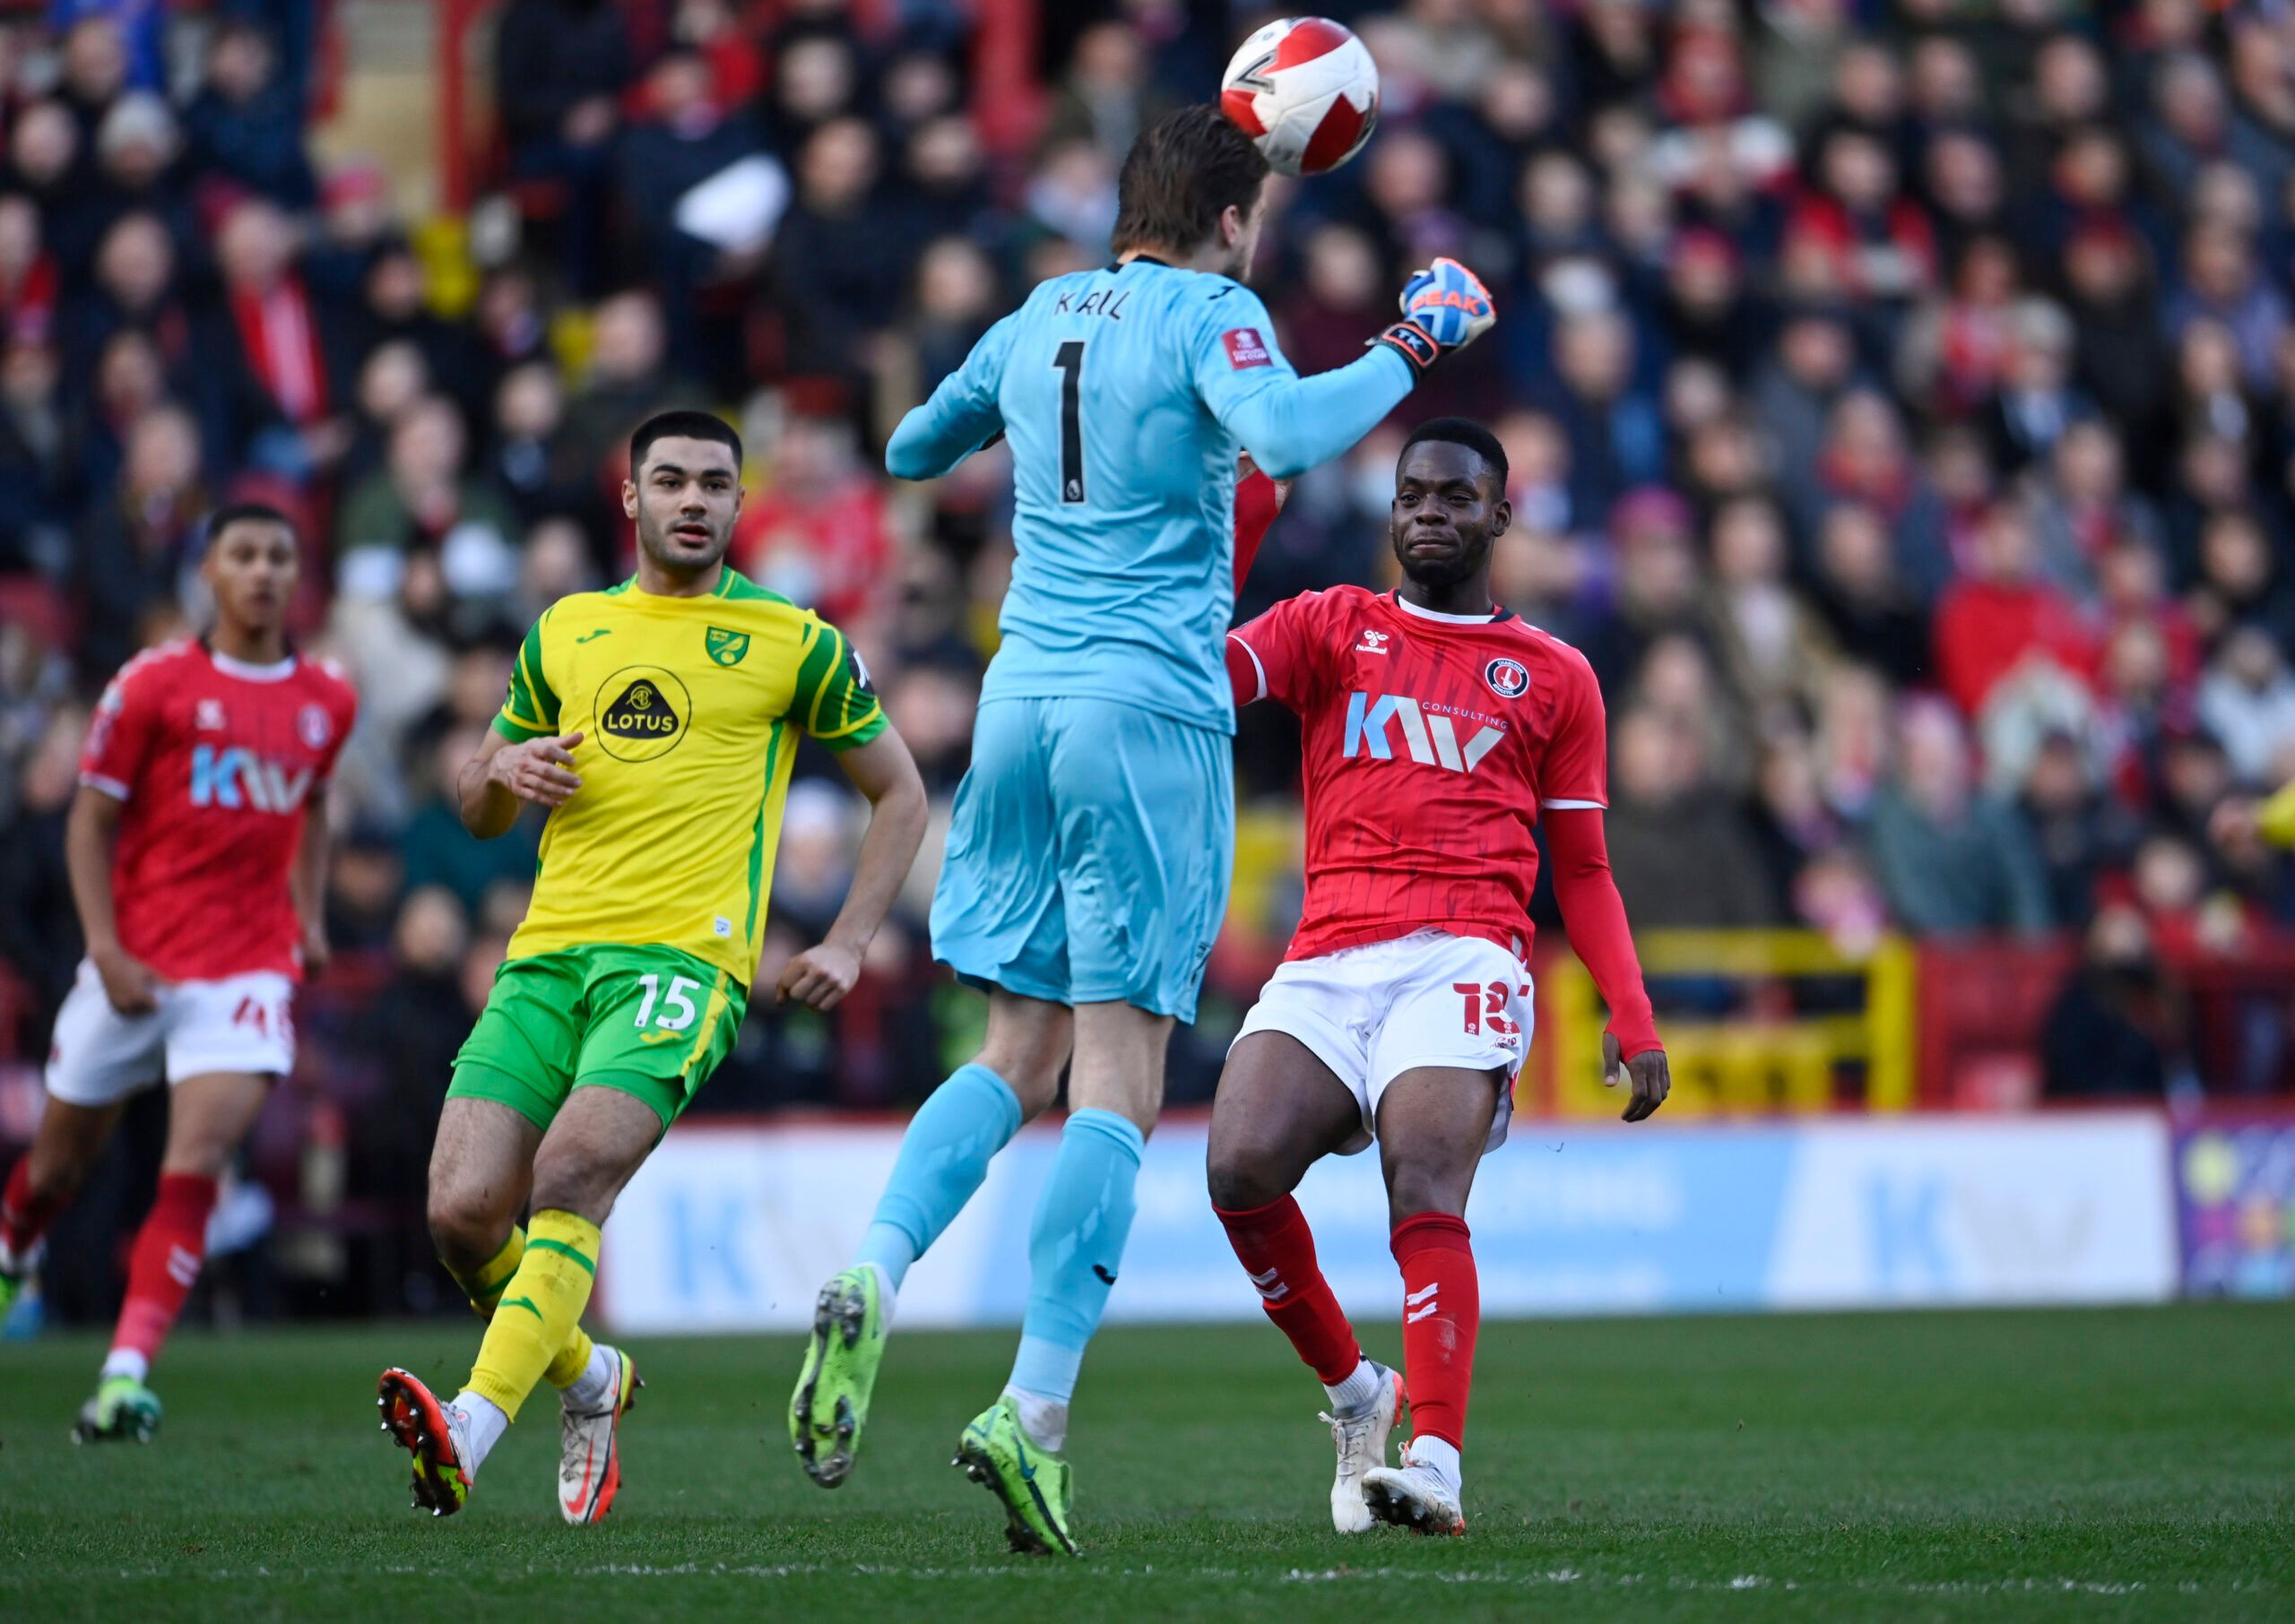 Soccer Football - FA Cup Third Round - Charlton Athletic v Norwich City - The Valley, London, Britain - January 9, 2022 Norwich City's Tim Krul in action with Charlton Athletic's Jonathan Leko REUTERS/Tony Obrien